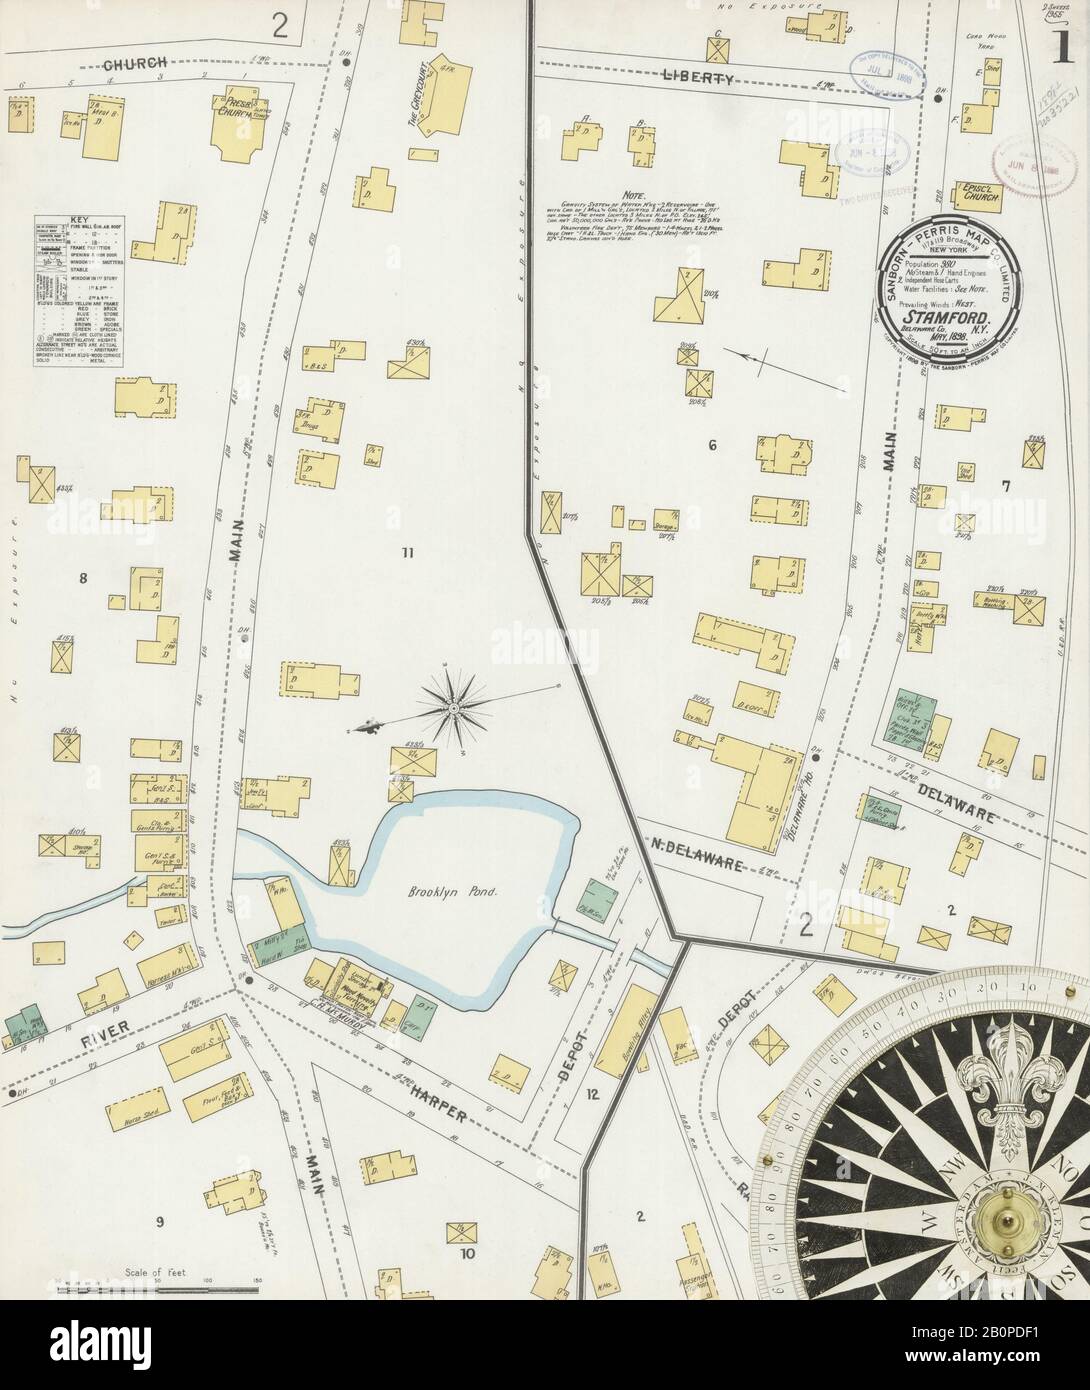 Image 1 of Sanborn Fire Insurance Map from Stamford, Delaware County, New York. May 1898. 2 Sheet(s), America, street map with a Nineteenth Century compass Stock Photo